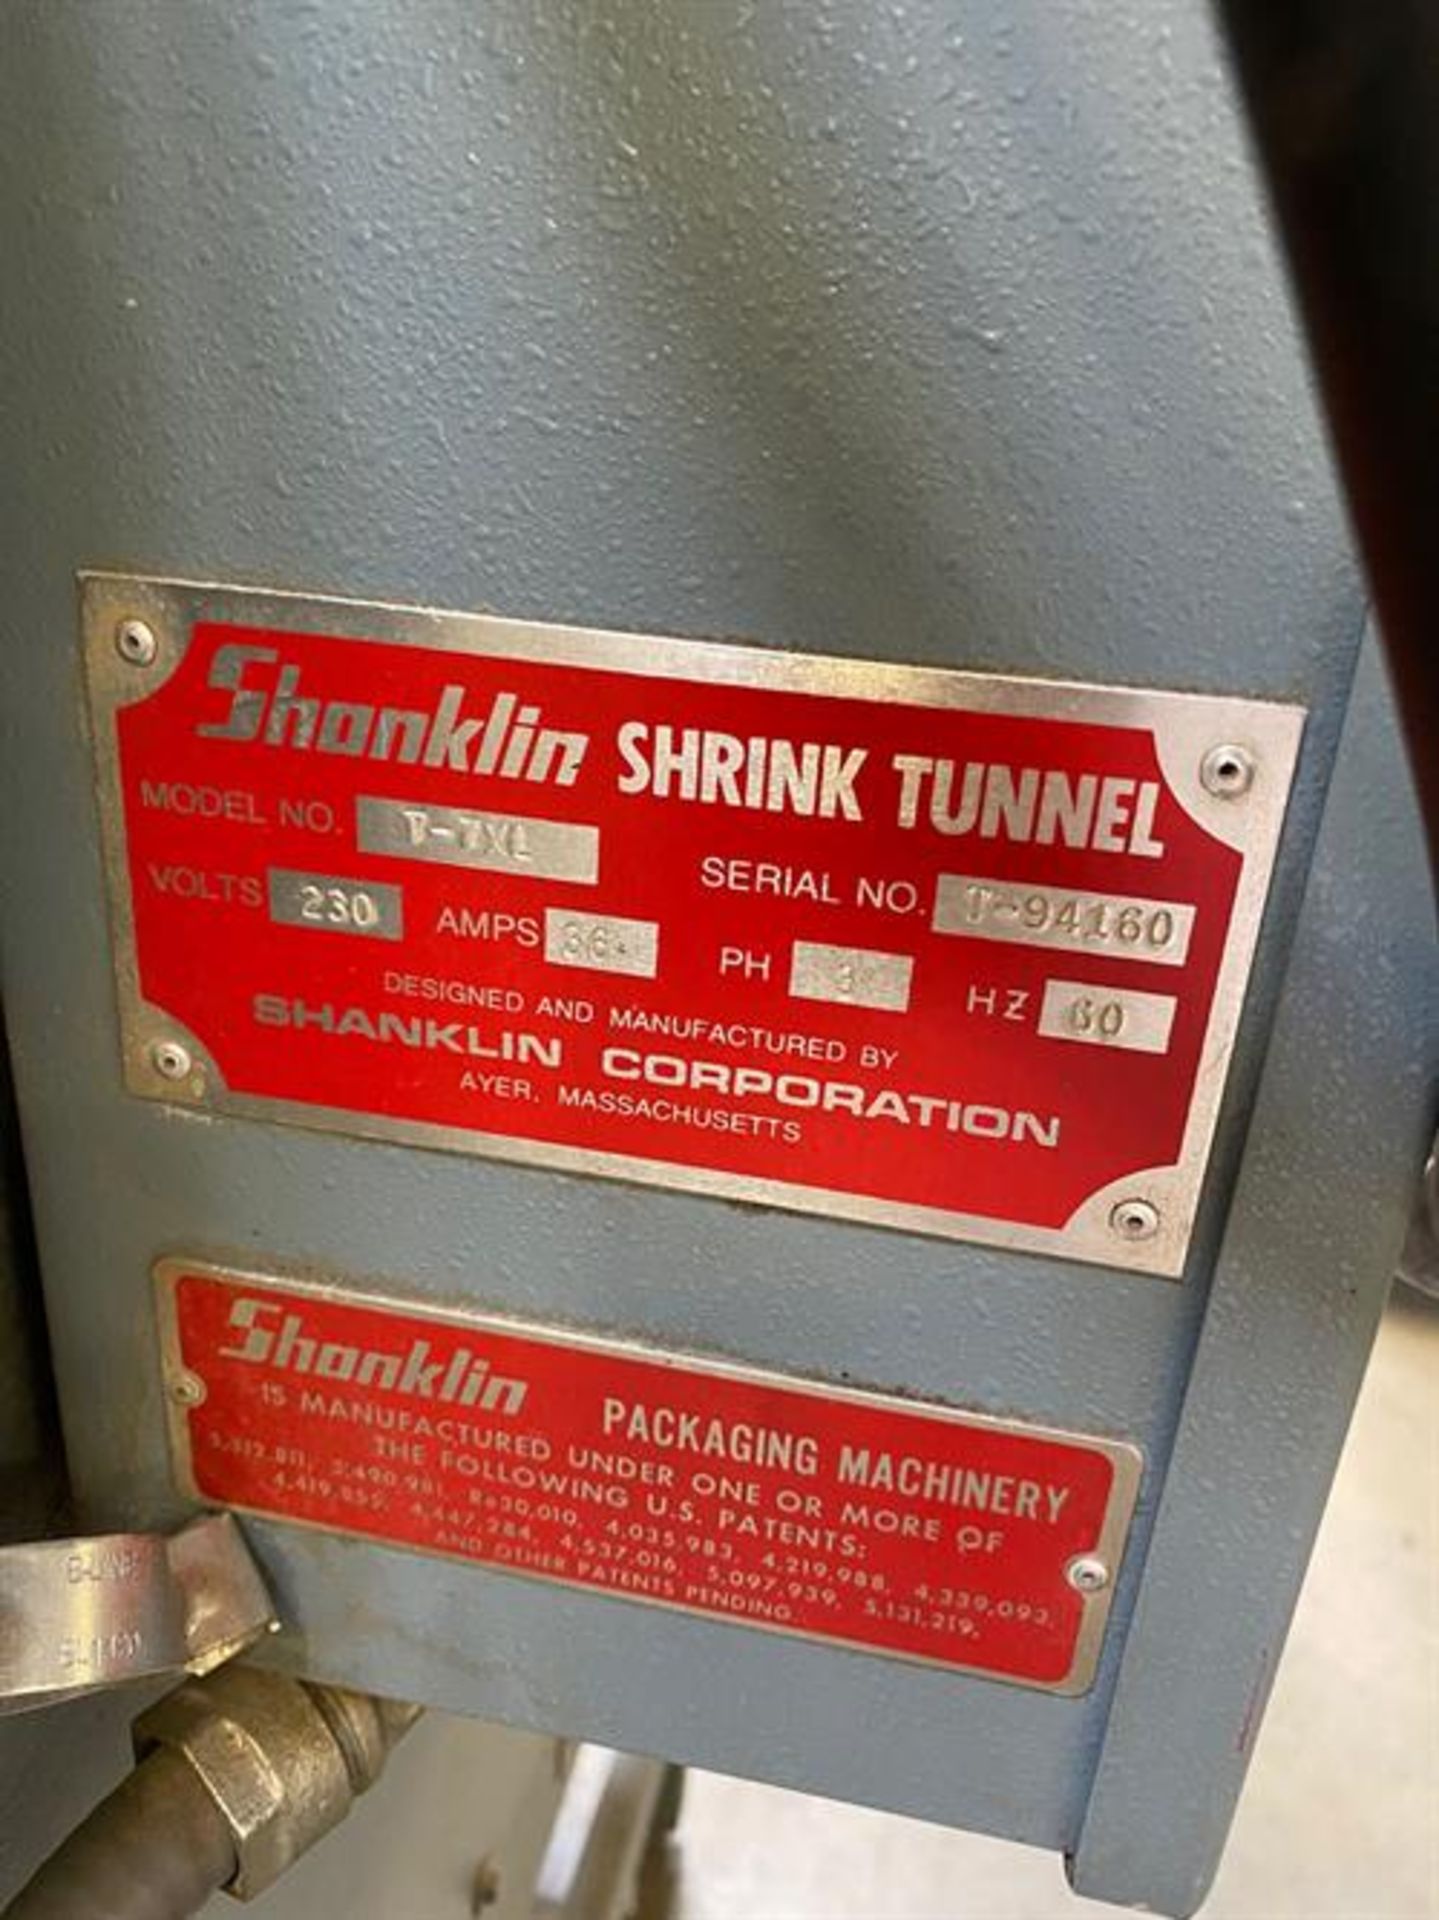 Shanklin Model T-7XL Shrink Tunnel - Serial number T94160 - Opening 9" high x 22" wide - 3/60/230v - - Image 6 of 6